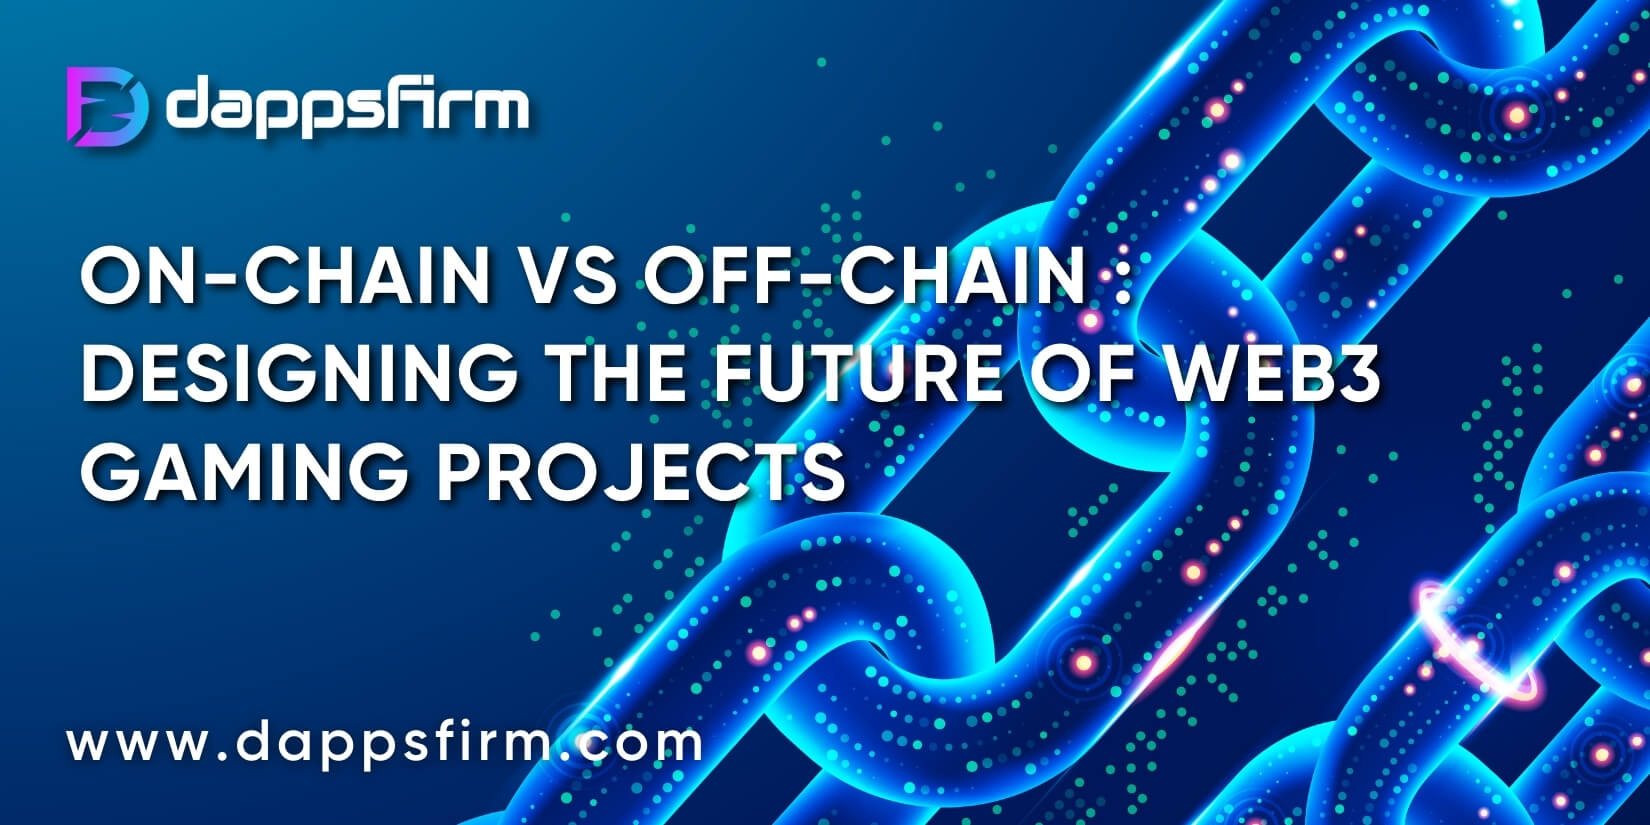 On-Chain vs. Off-Chain Gaming: Building the Next Generation of Web3 Games